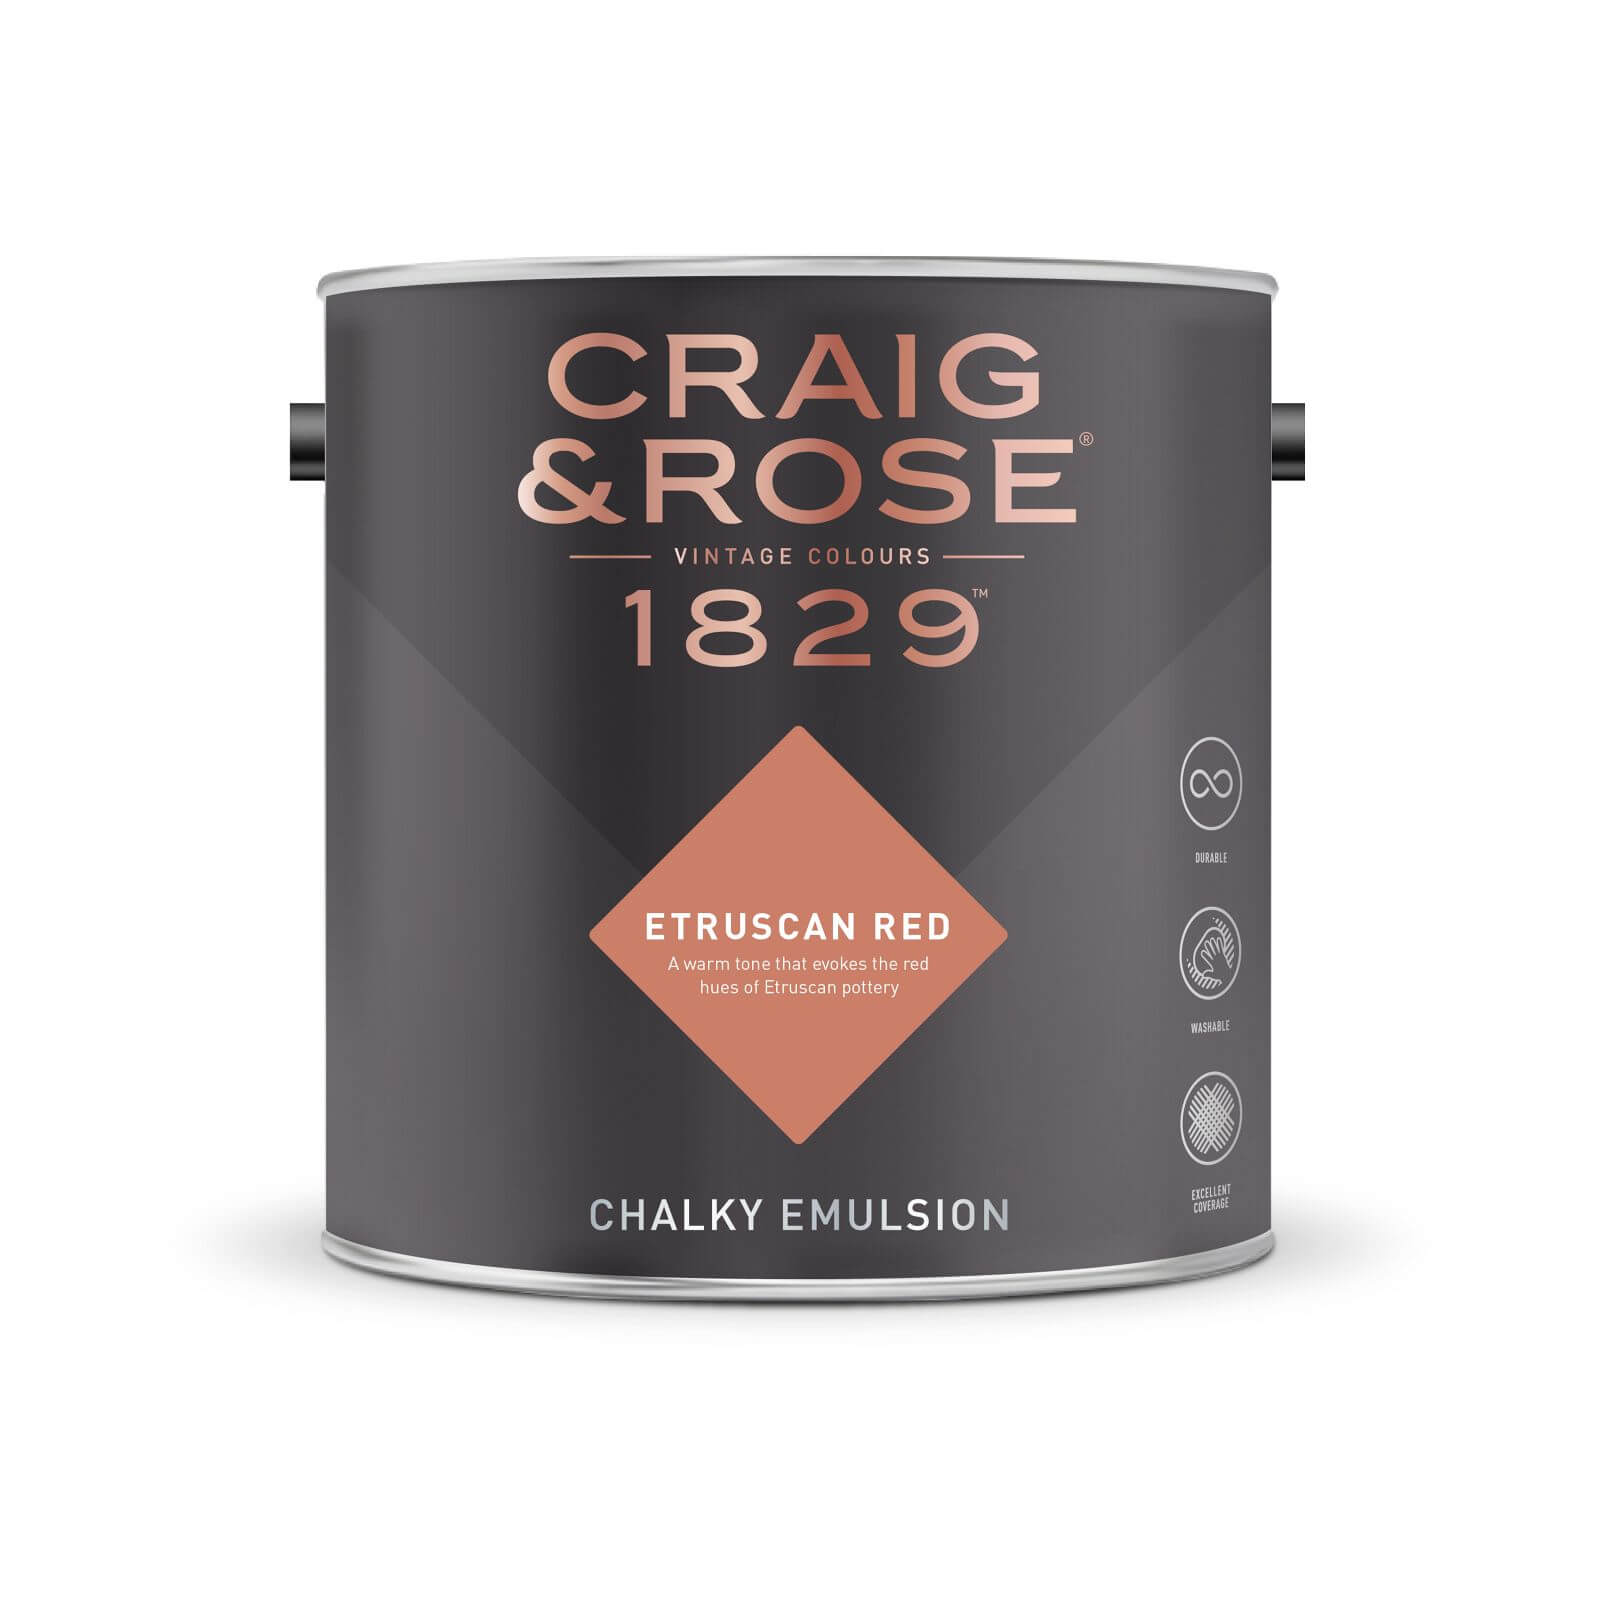 Craig & Rose 1829 Chalky Emulsion Paint Etruscan Red - Tester 50ml